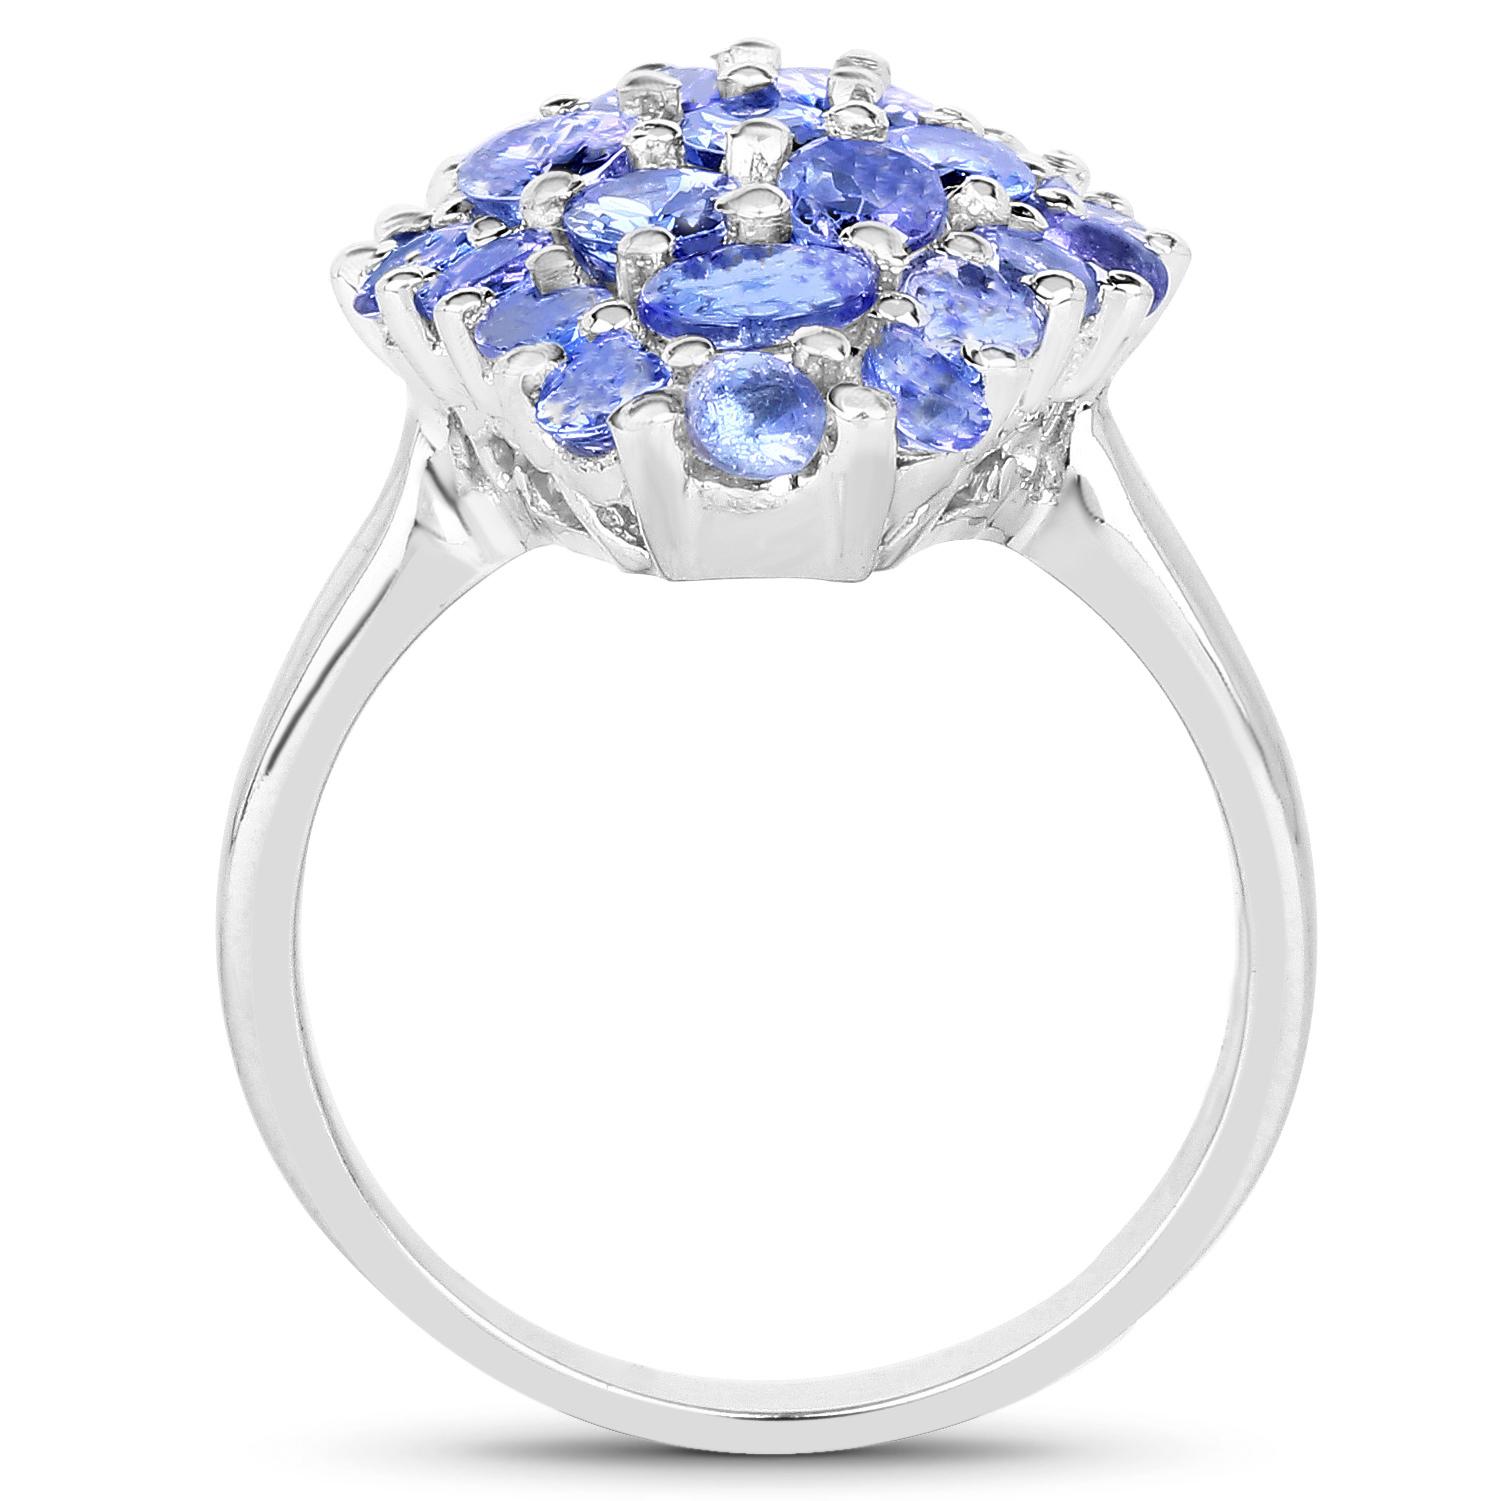 Tanzanite Cluster Ring 2.80 Carats Rhodium Plated Sterling Silver In Excellent Condition For Sale In Laguna Niguel, CA